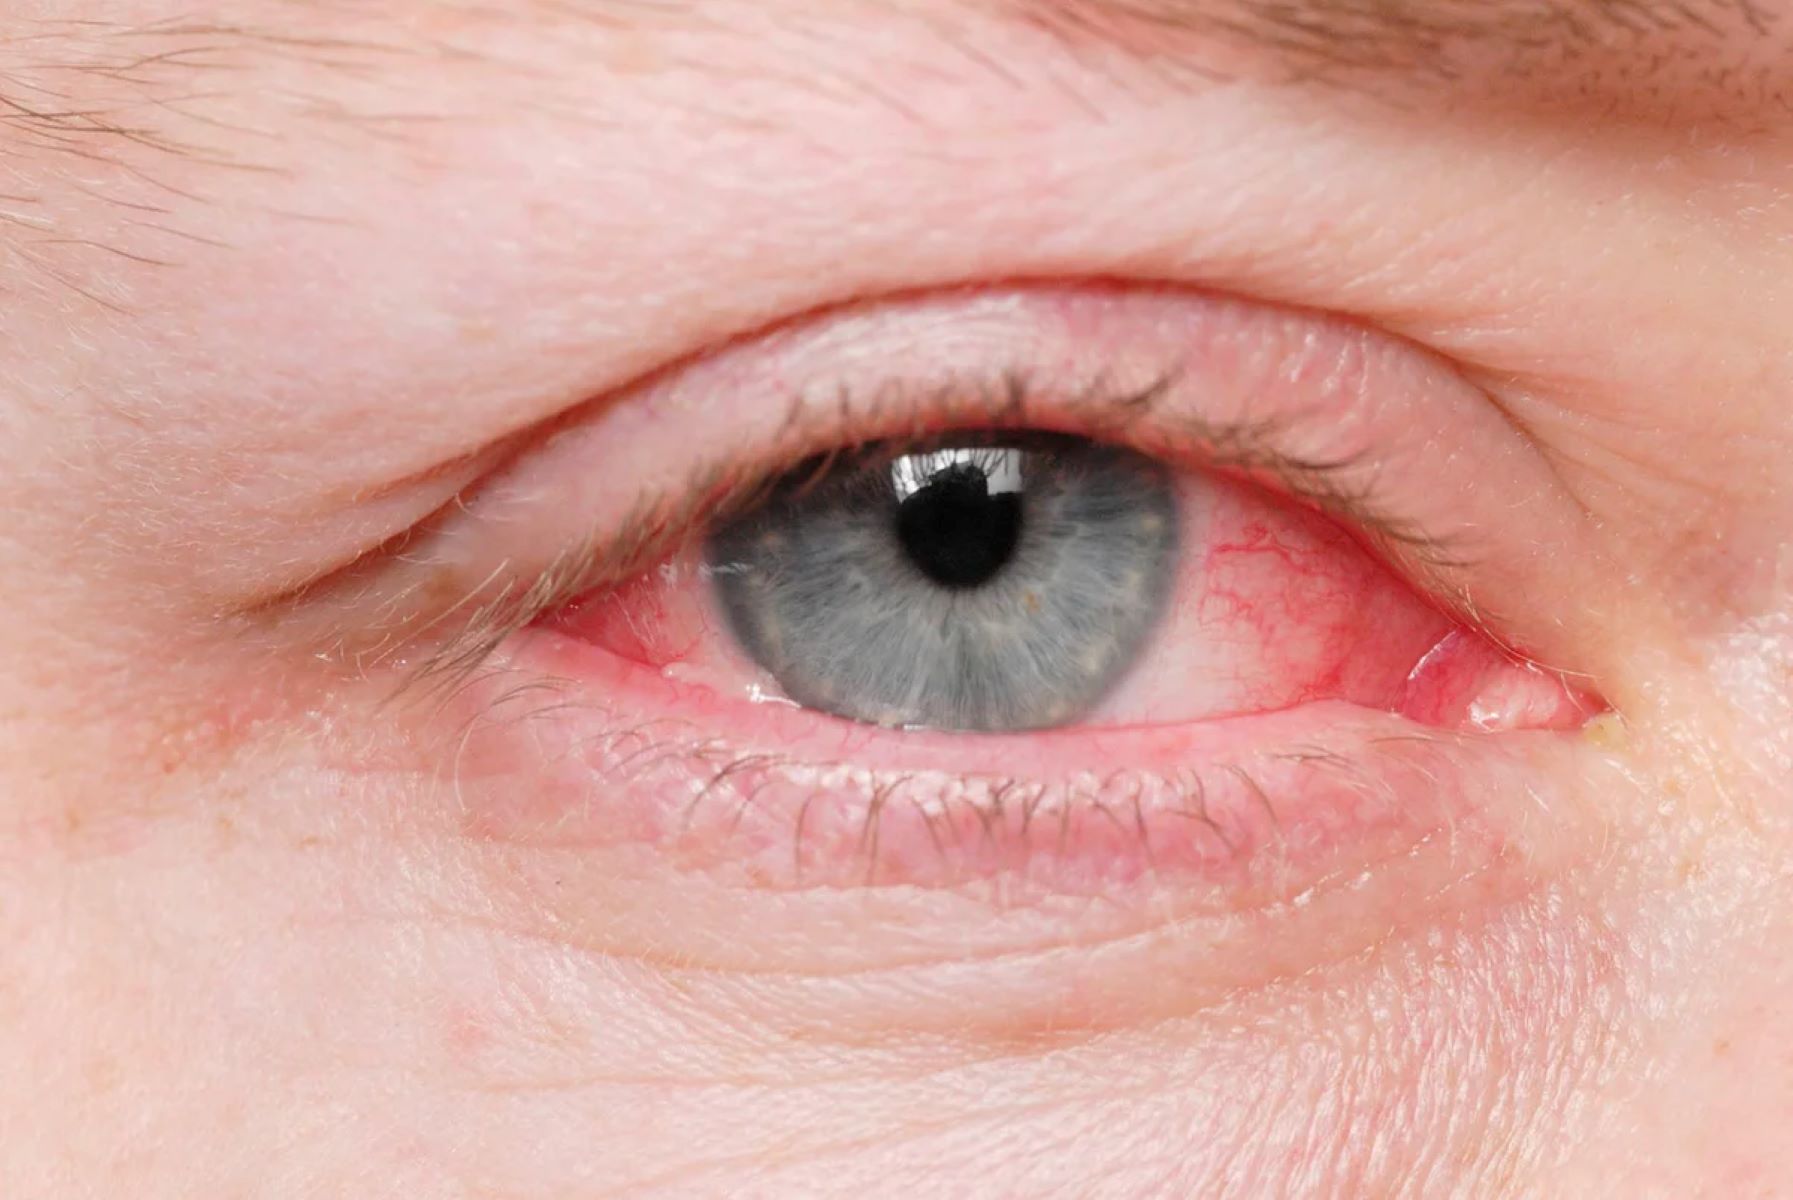 Surprising Way You Could Catch Pink Eye – You Won’t Believe What Happened!